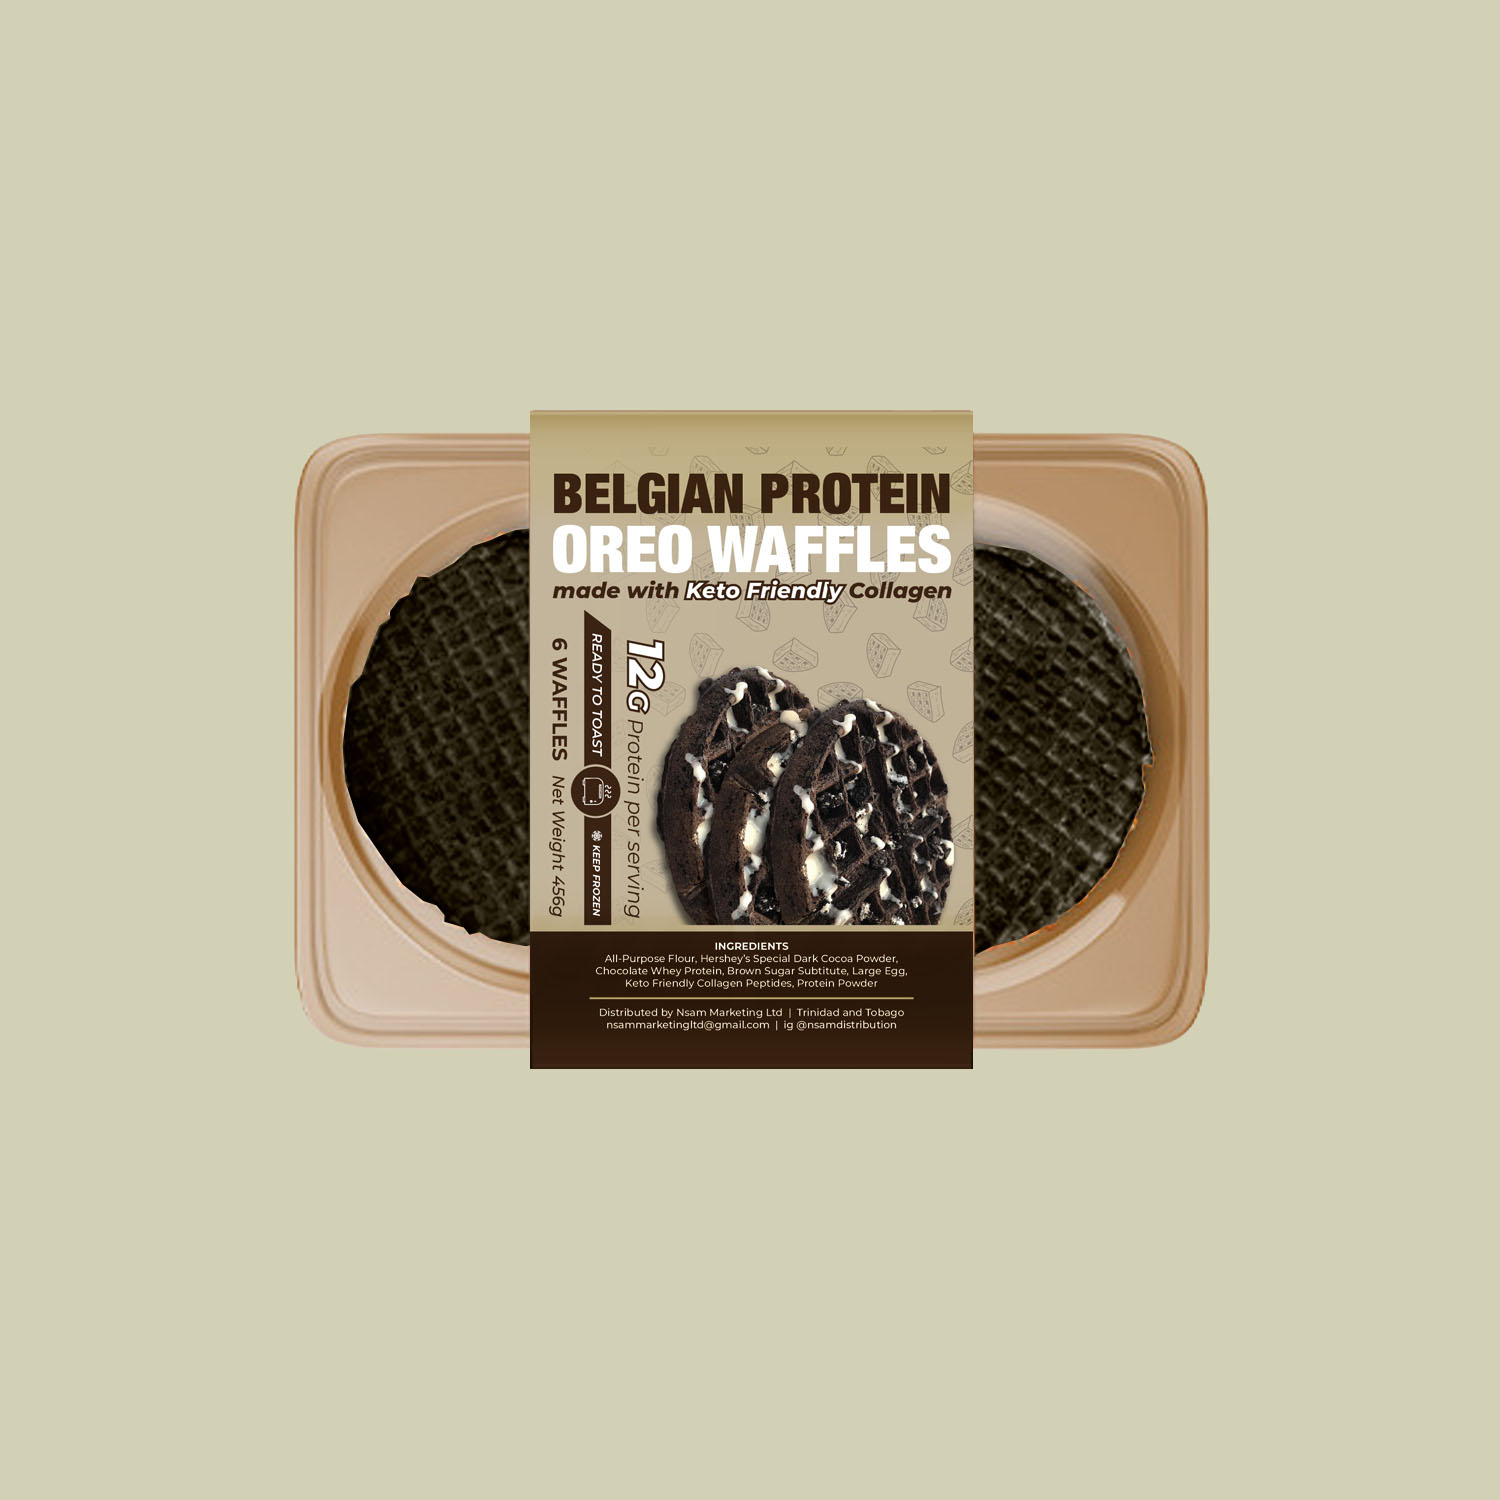 Product Label Design For Belgian Oreo Waffles